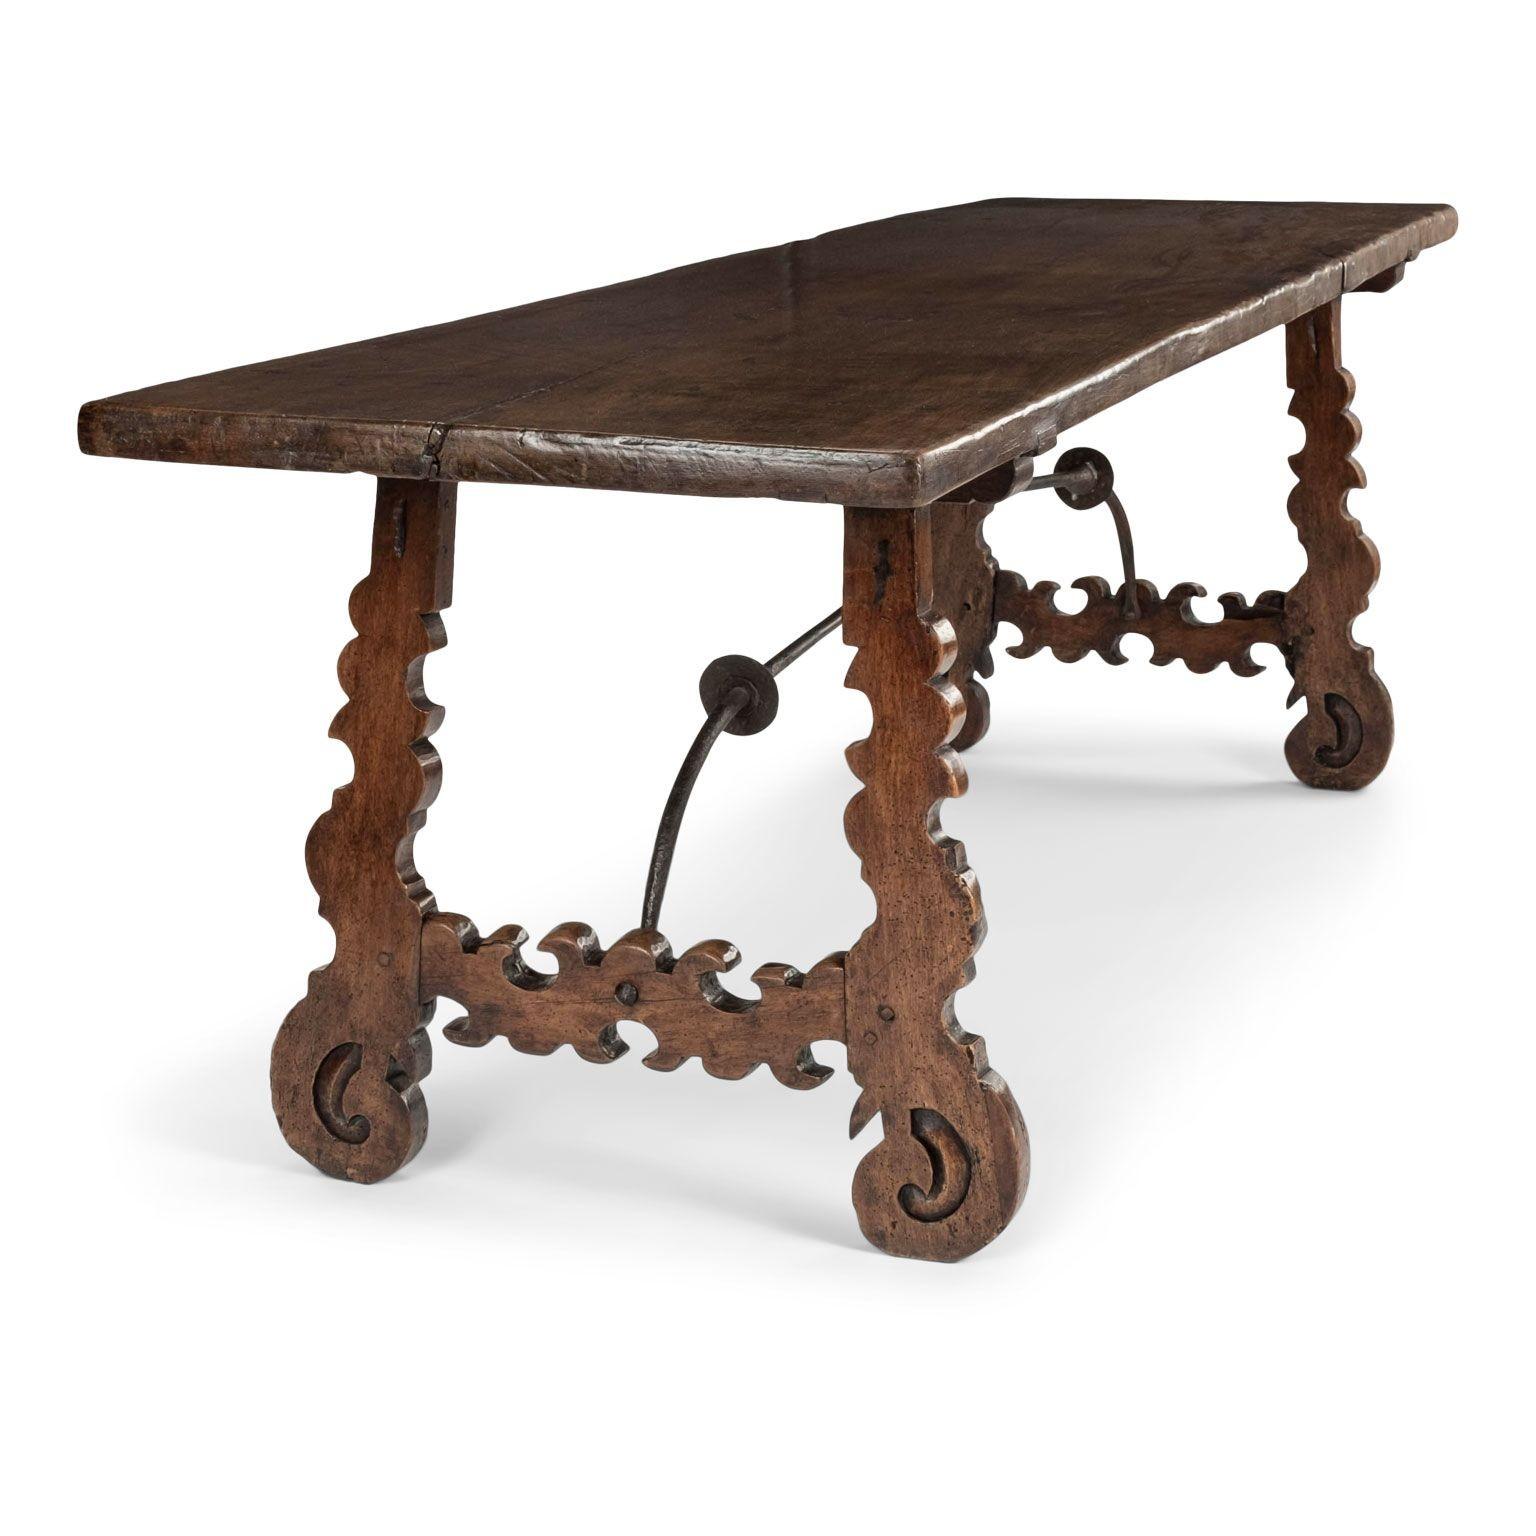 Hand-Carved Late 17th Century Italian Walnut Dining Table or Console For Sale